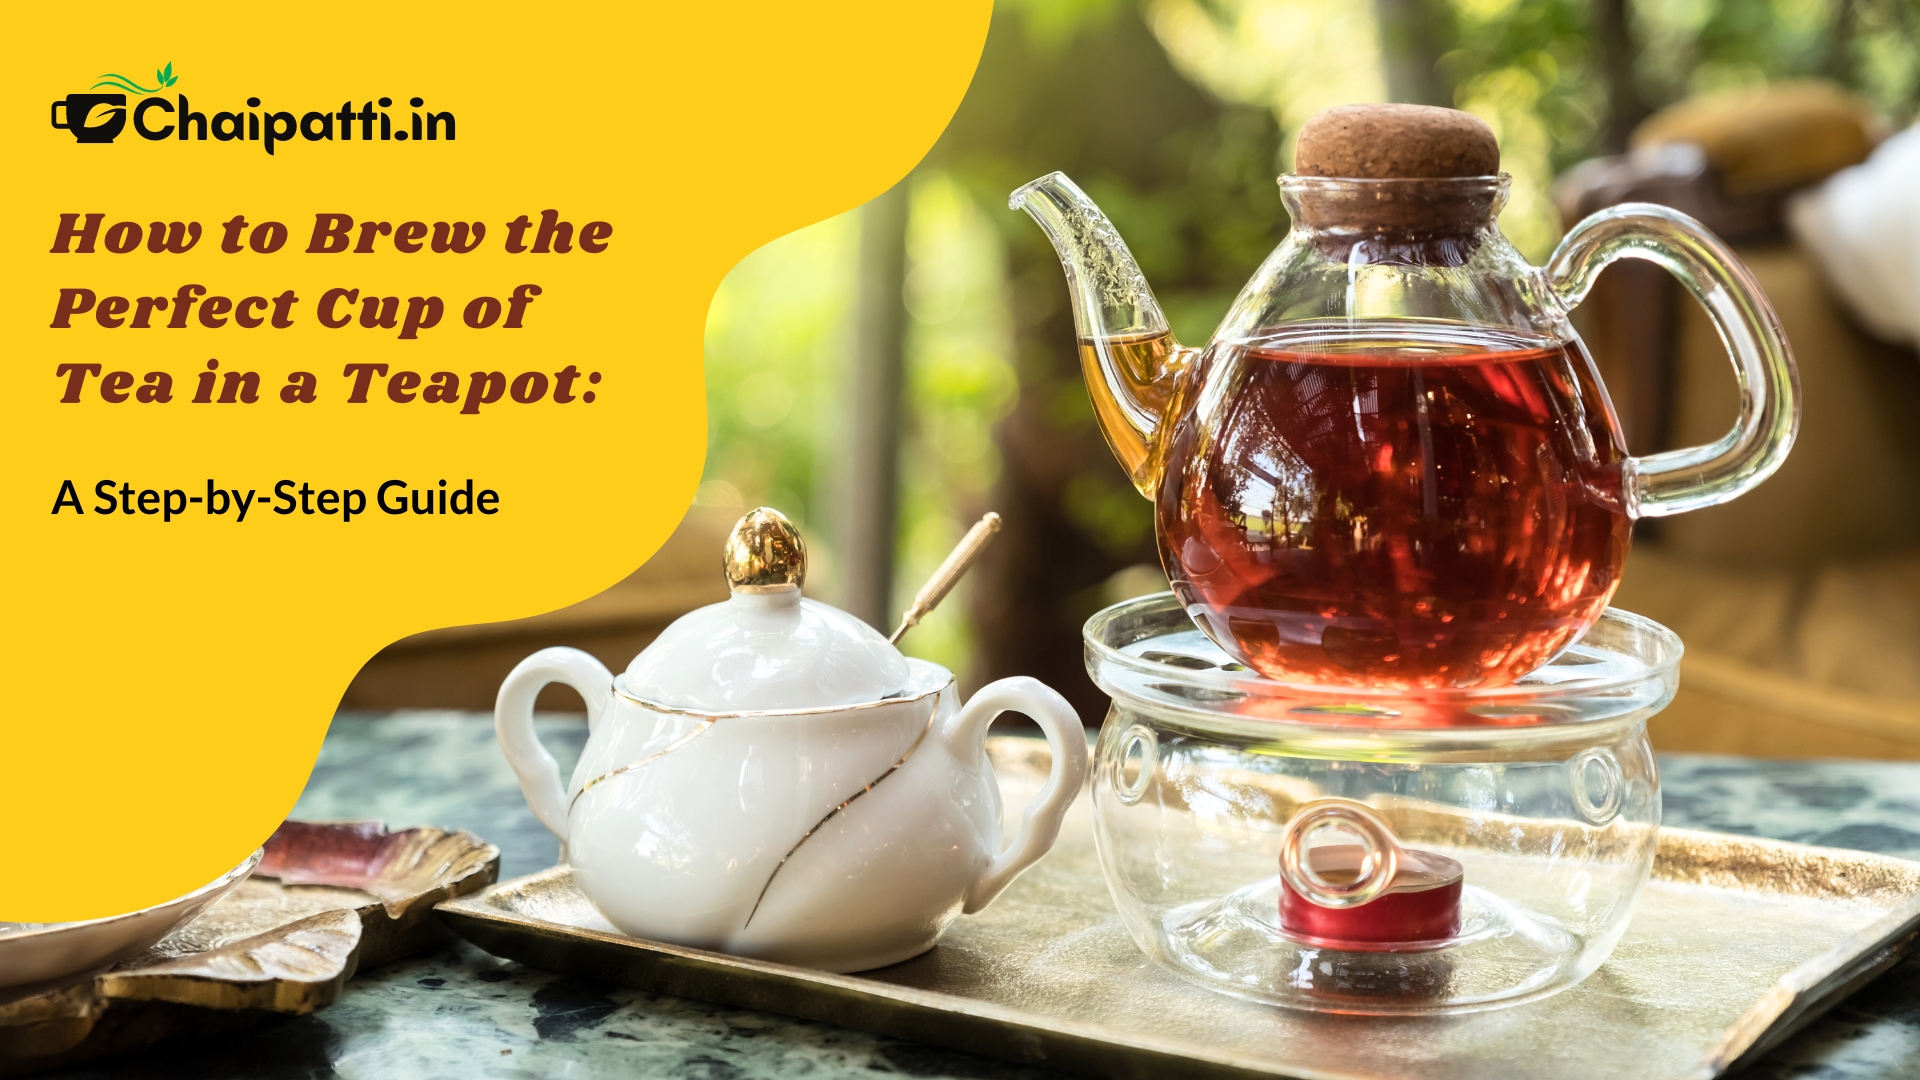 How to Brew the Perfect Cup of Tea in a Teapot: A Step-by-Step Guide